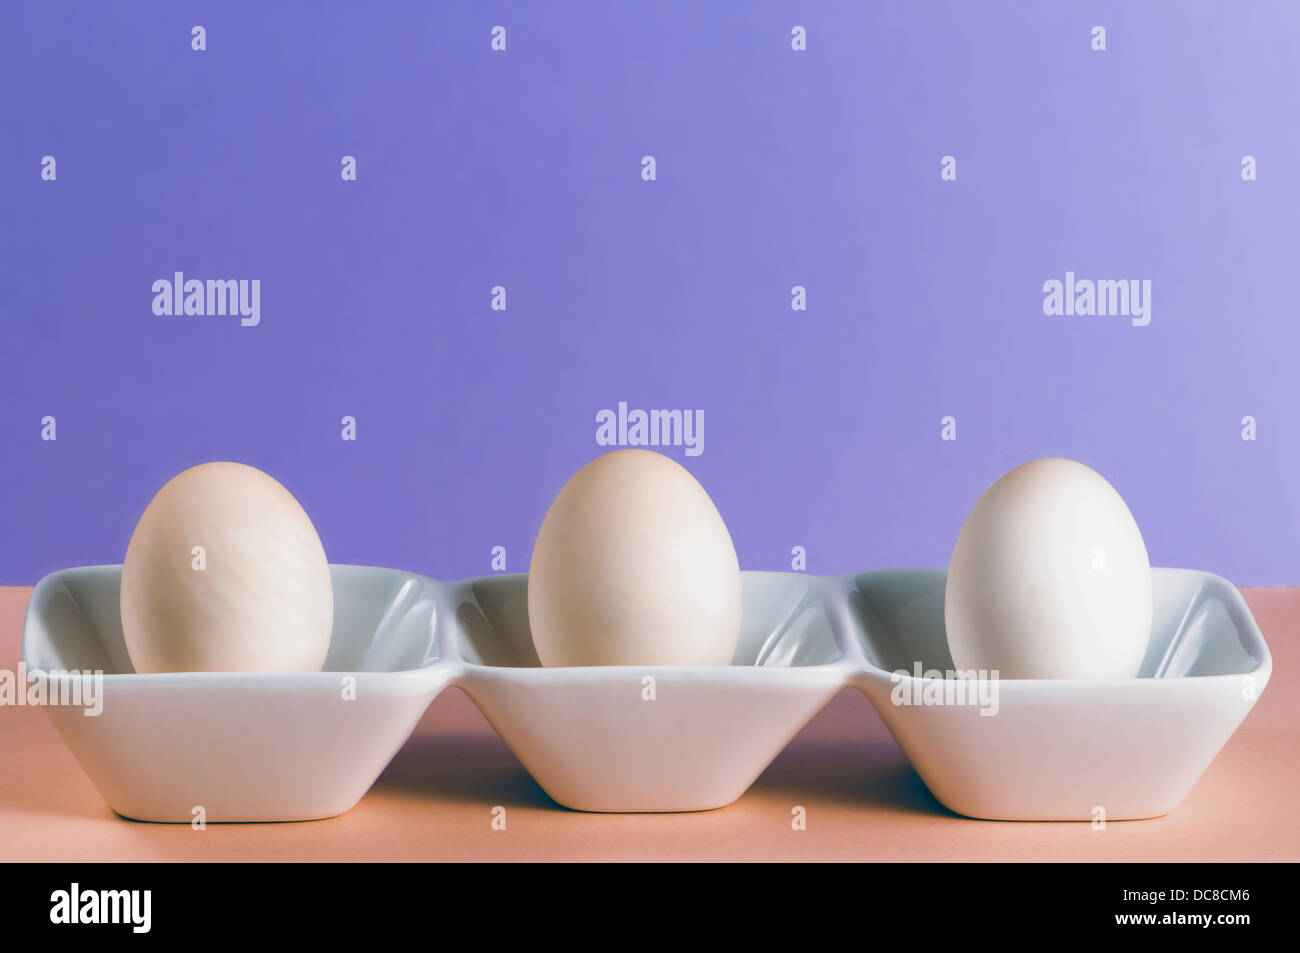 Three duck eggs in a white porcelain dish Stock Photo